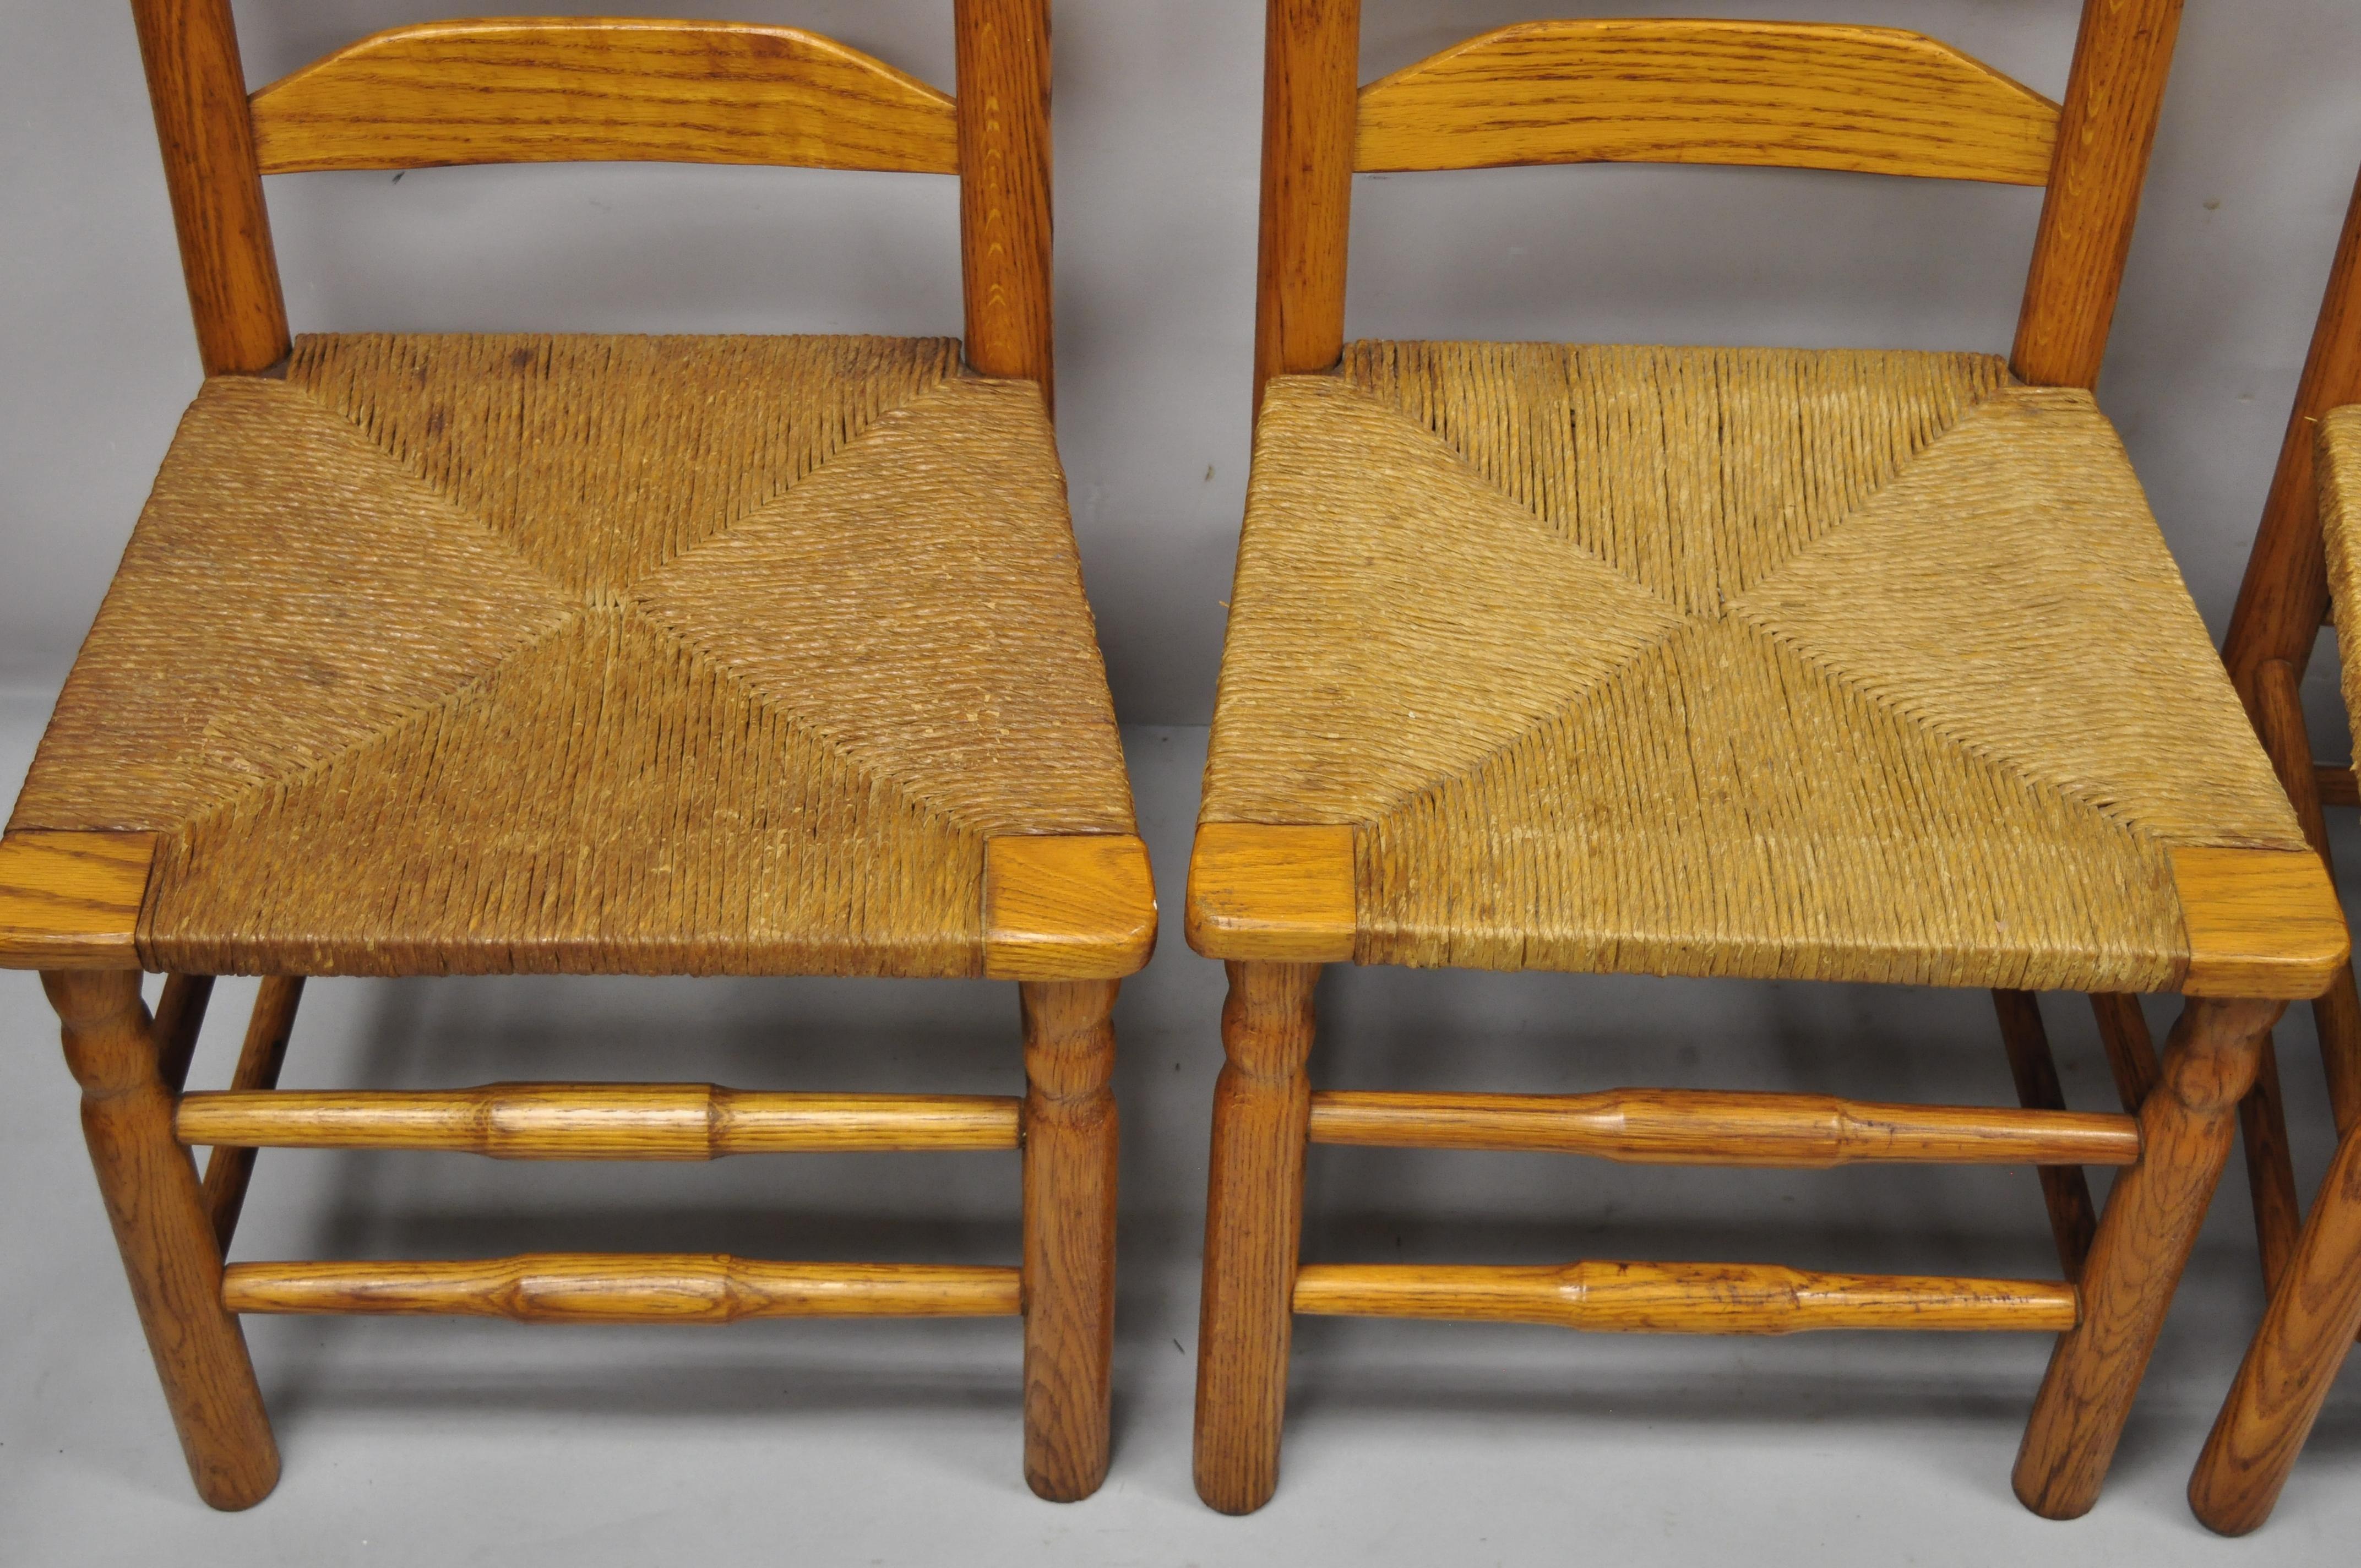 20th Century Vintage Oak Wood Rush Seat Tall Ladderback Dining Room Rustic Chairs, Set of 6